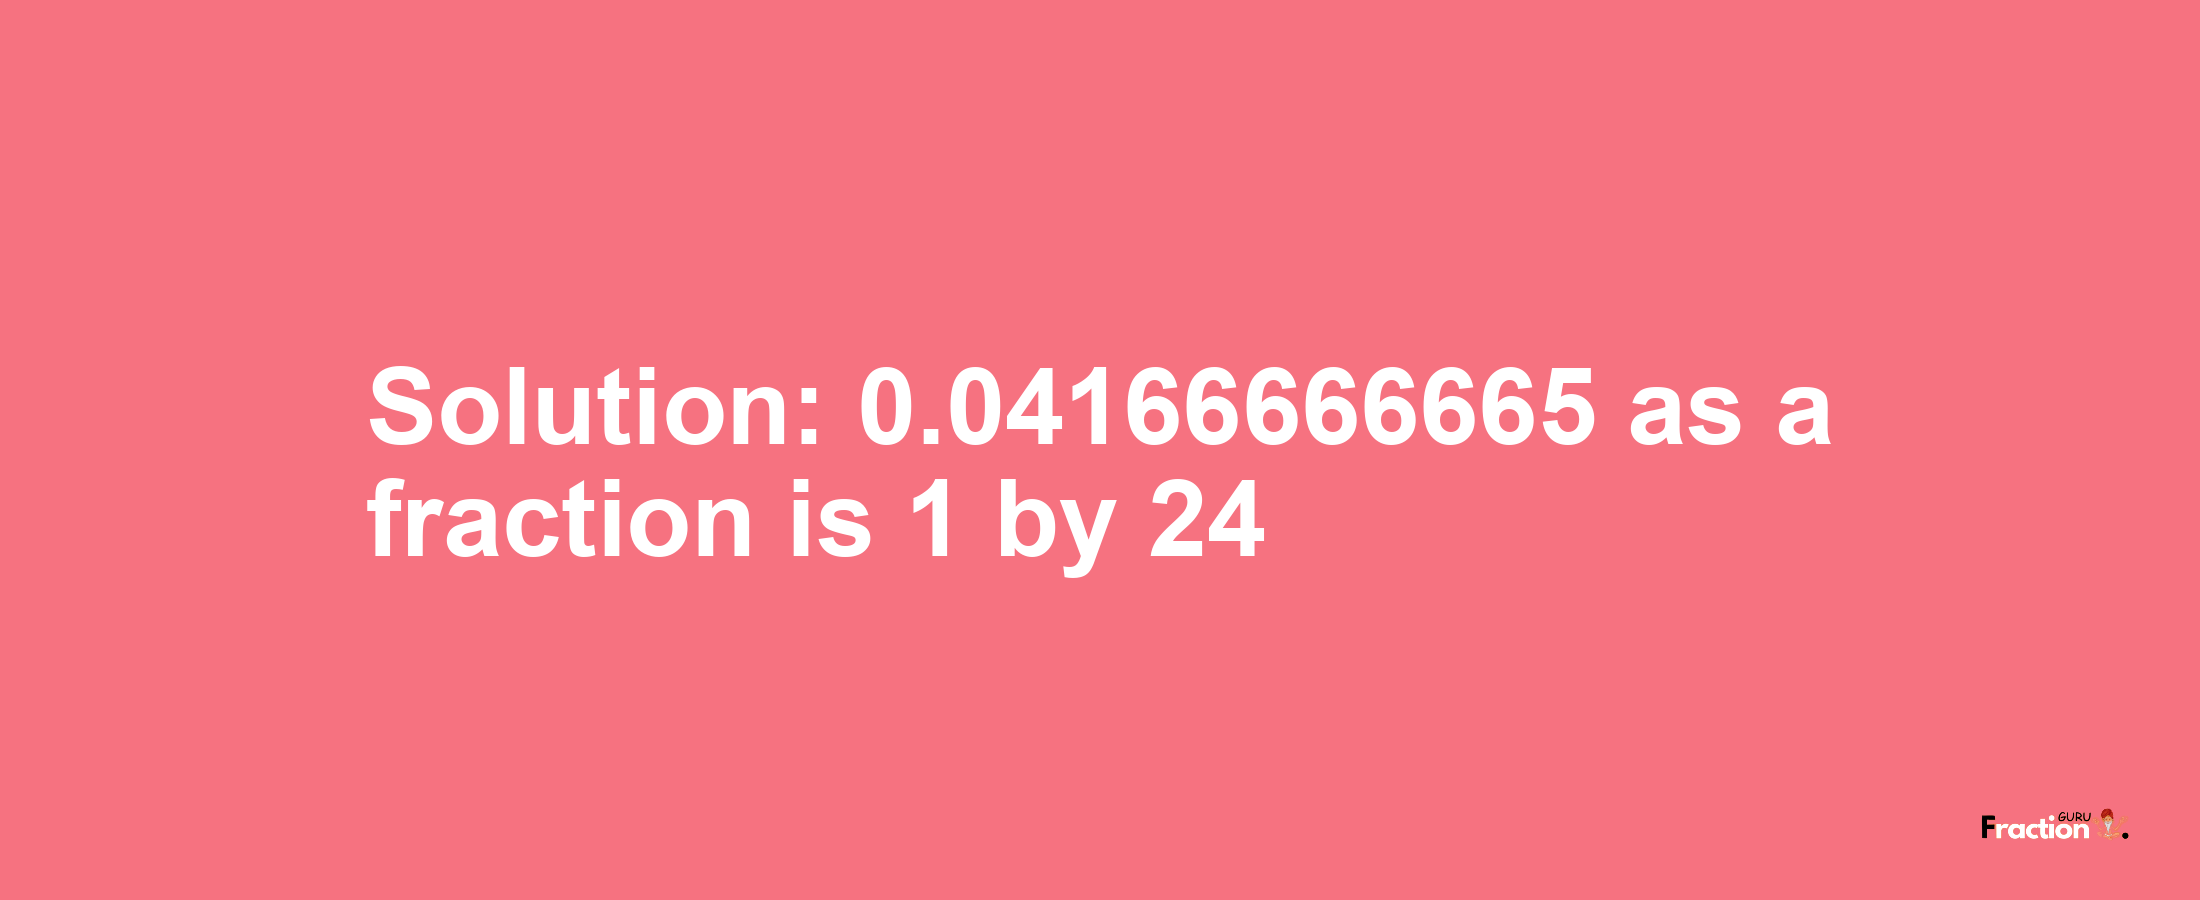 Solution:0.04166666665 as a fraction is 1/24